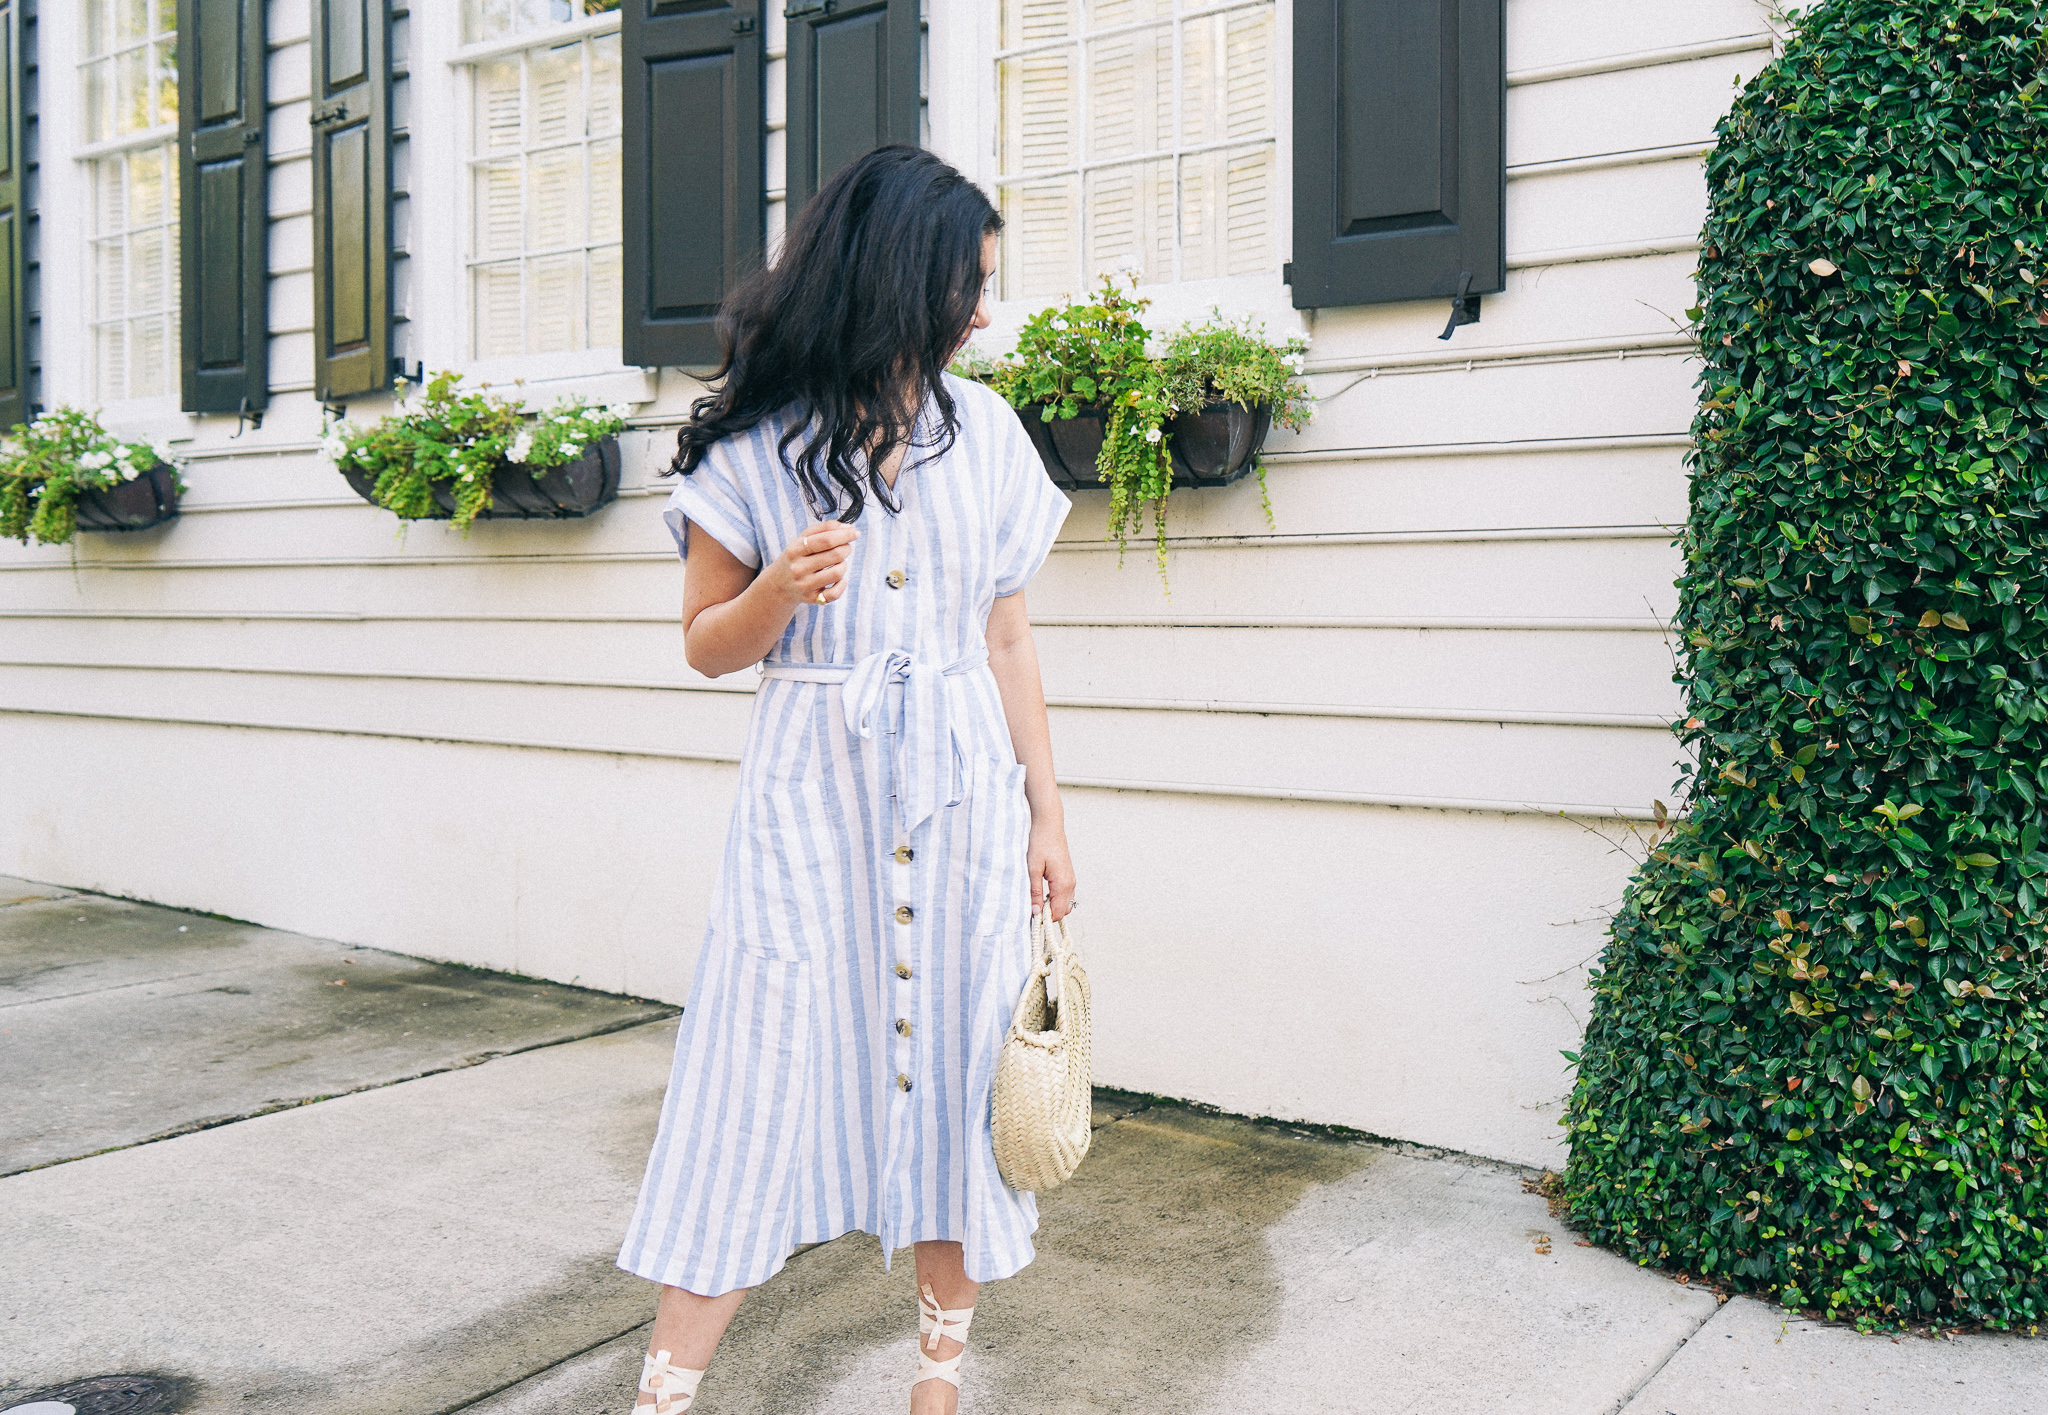 Summer Capsule Outfit: Easy Linen - ABOUT Summer Capsule Outfit: Easy Linen  — SHOP Summer Capsule Outfit: Easy Linen 5 Must-Read Tips For First Time  Home Buyers